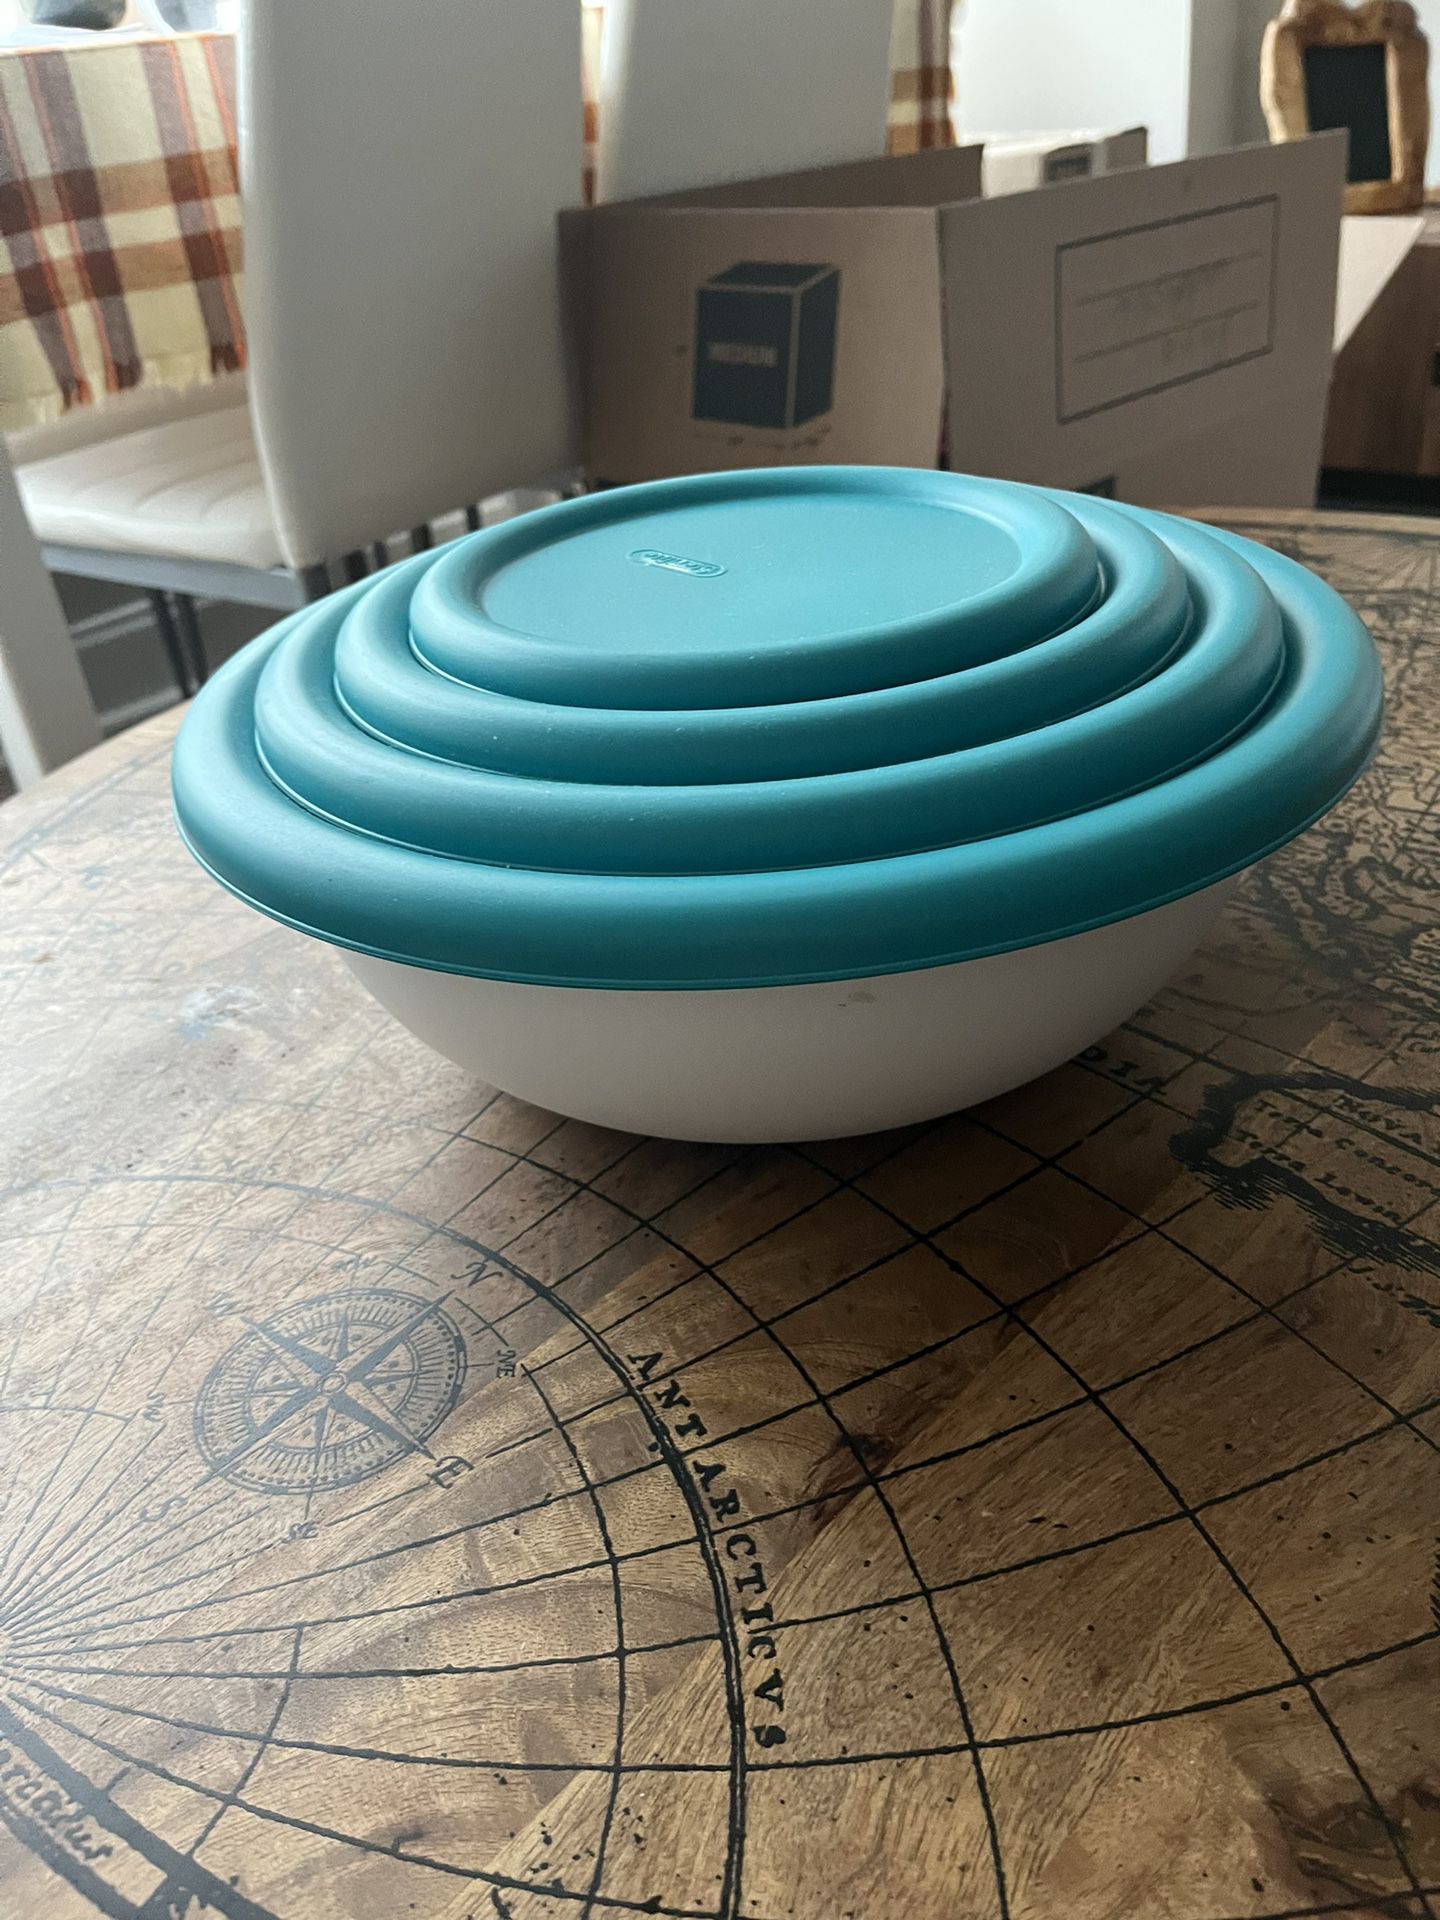 NEW 4 Sterilite bowls , Connecticut ave, NW